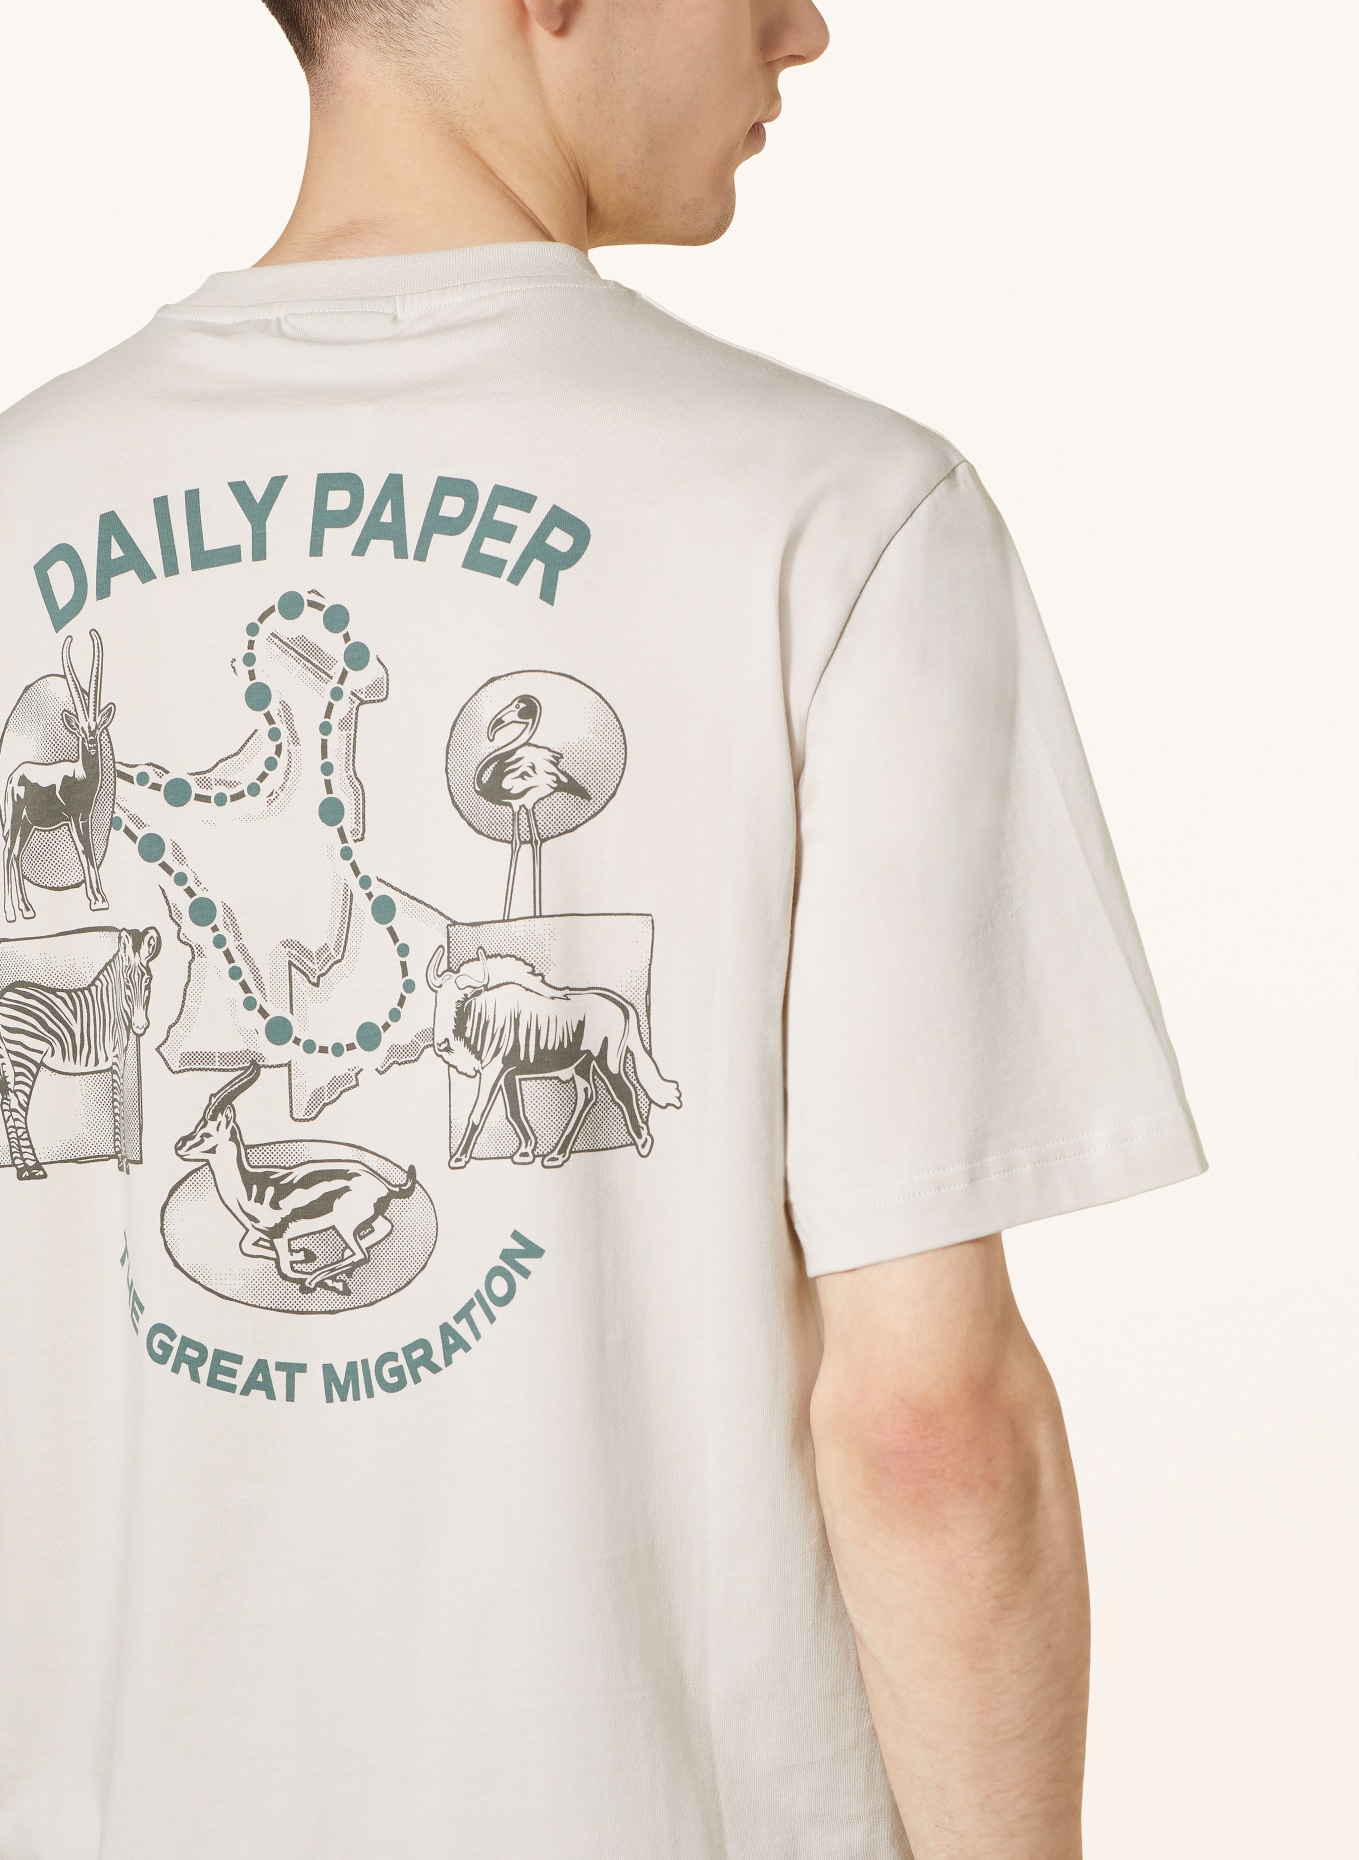 DAILY PAPER T-shirt, Color: ECRU/ TEAL/ GRAY (Image 4)